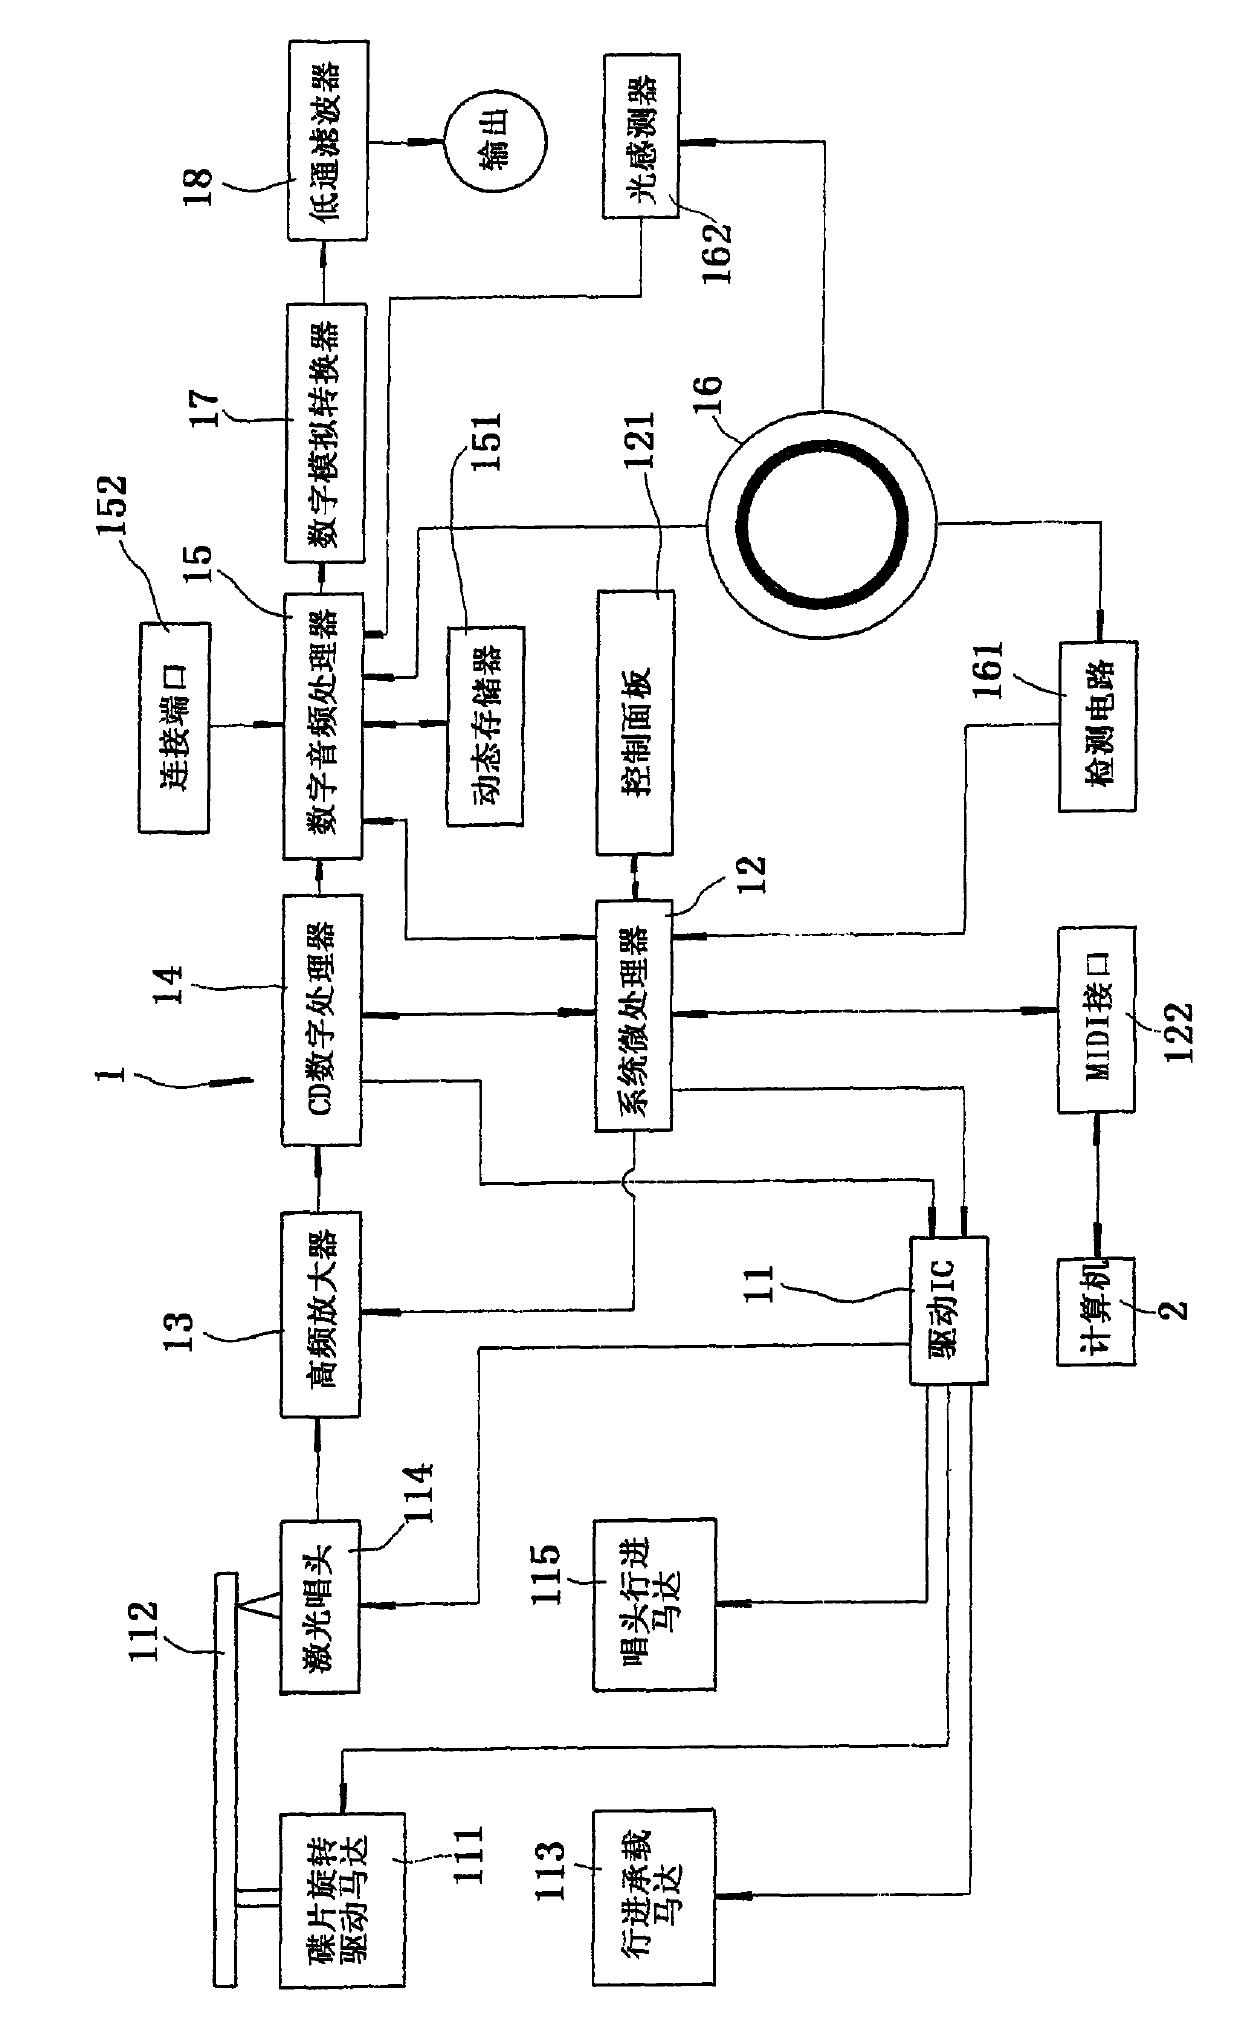 Operating method of specific starting point on lighting ring of digital multimedia audio player